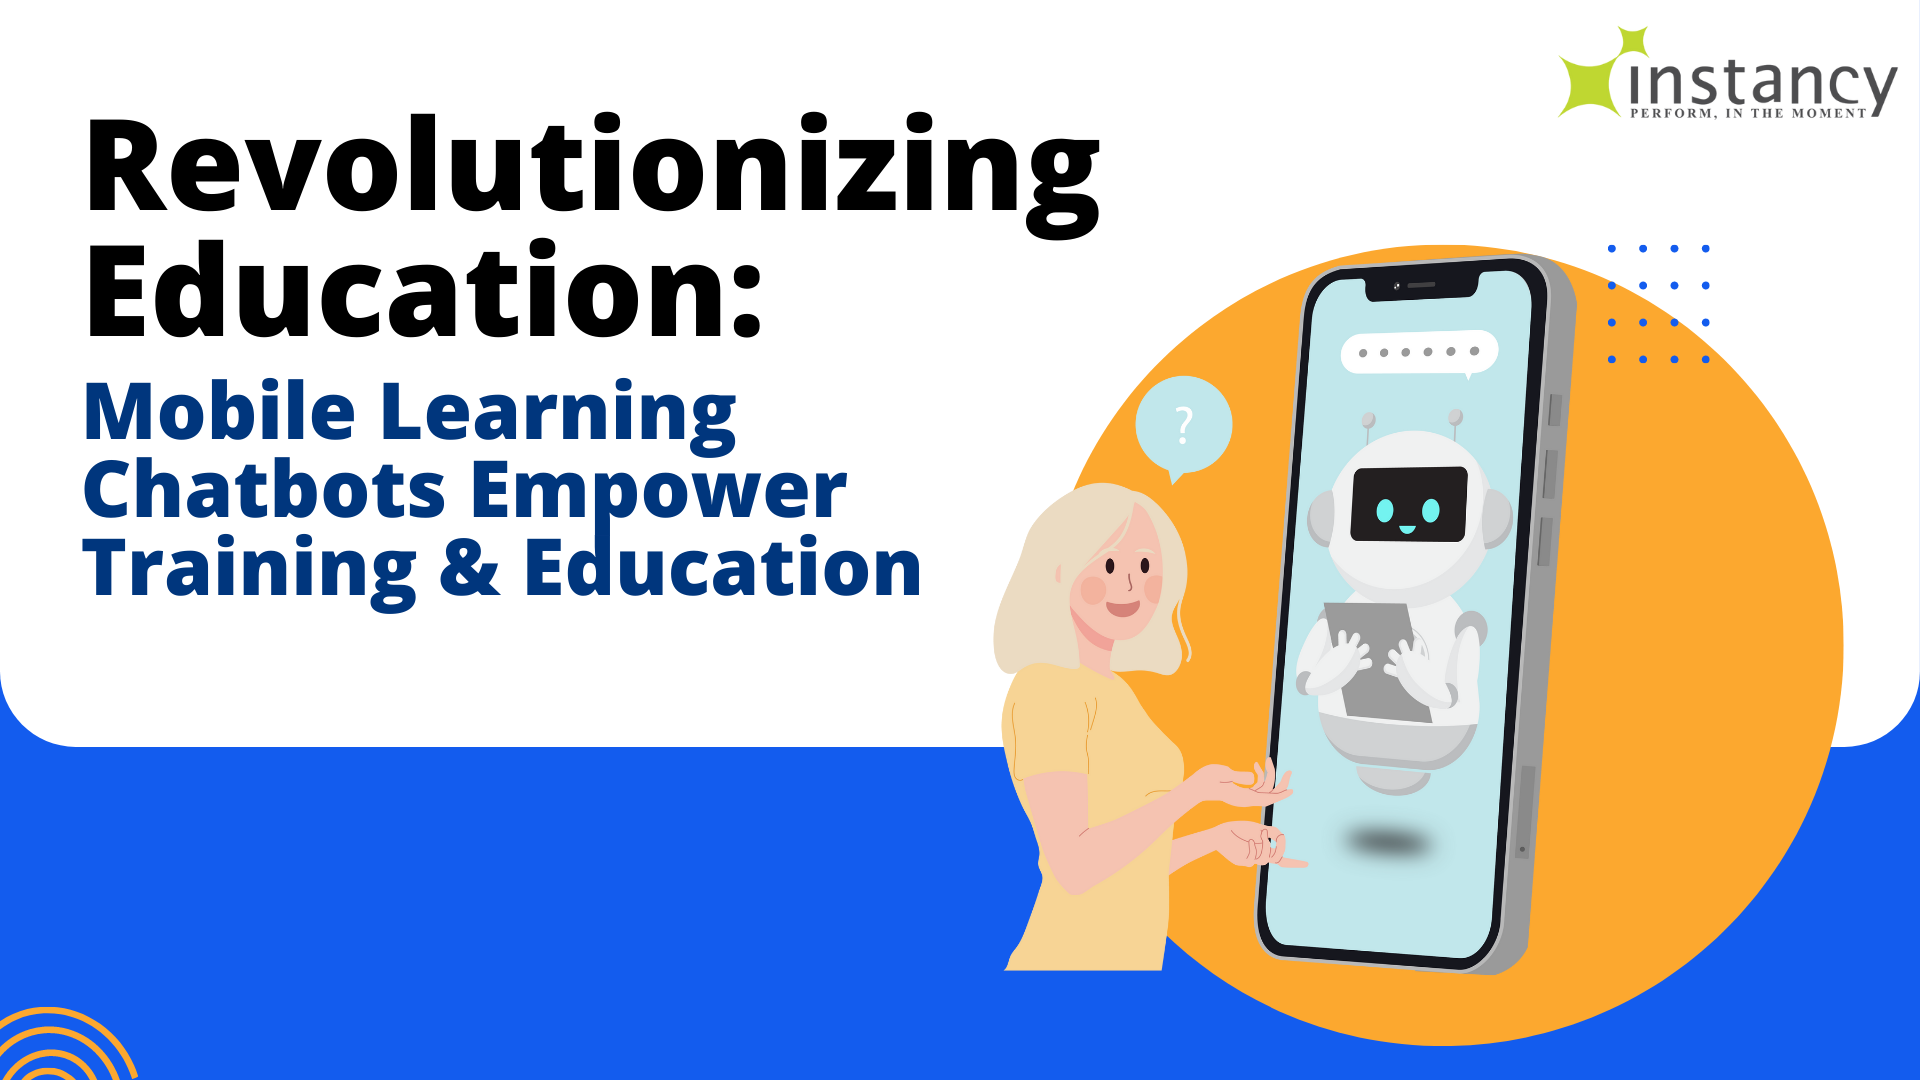 Mobile Learning chatbots